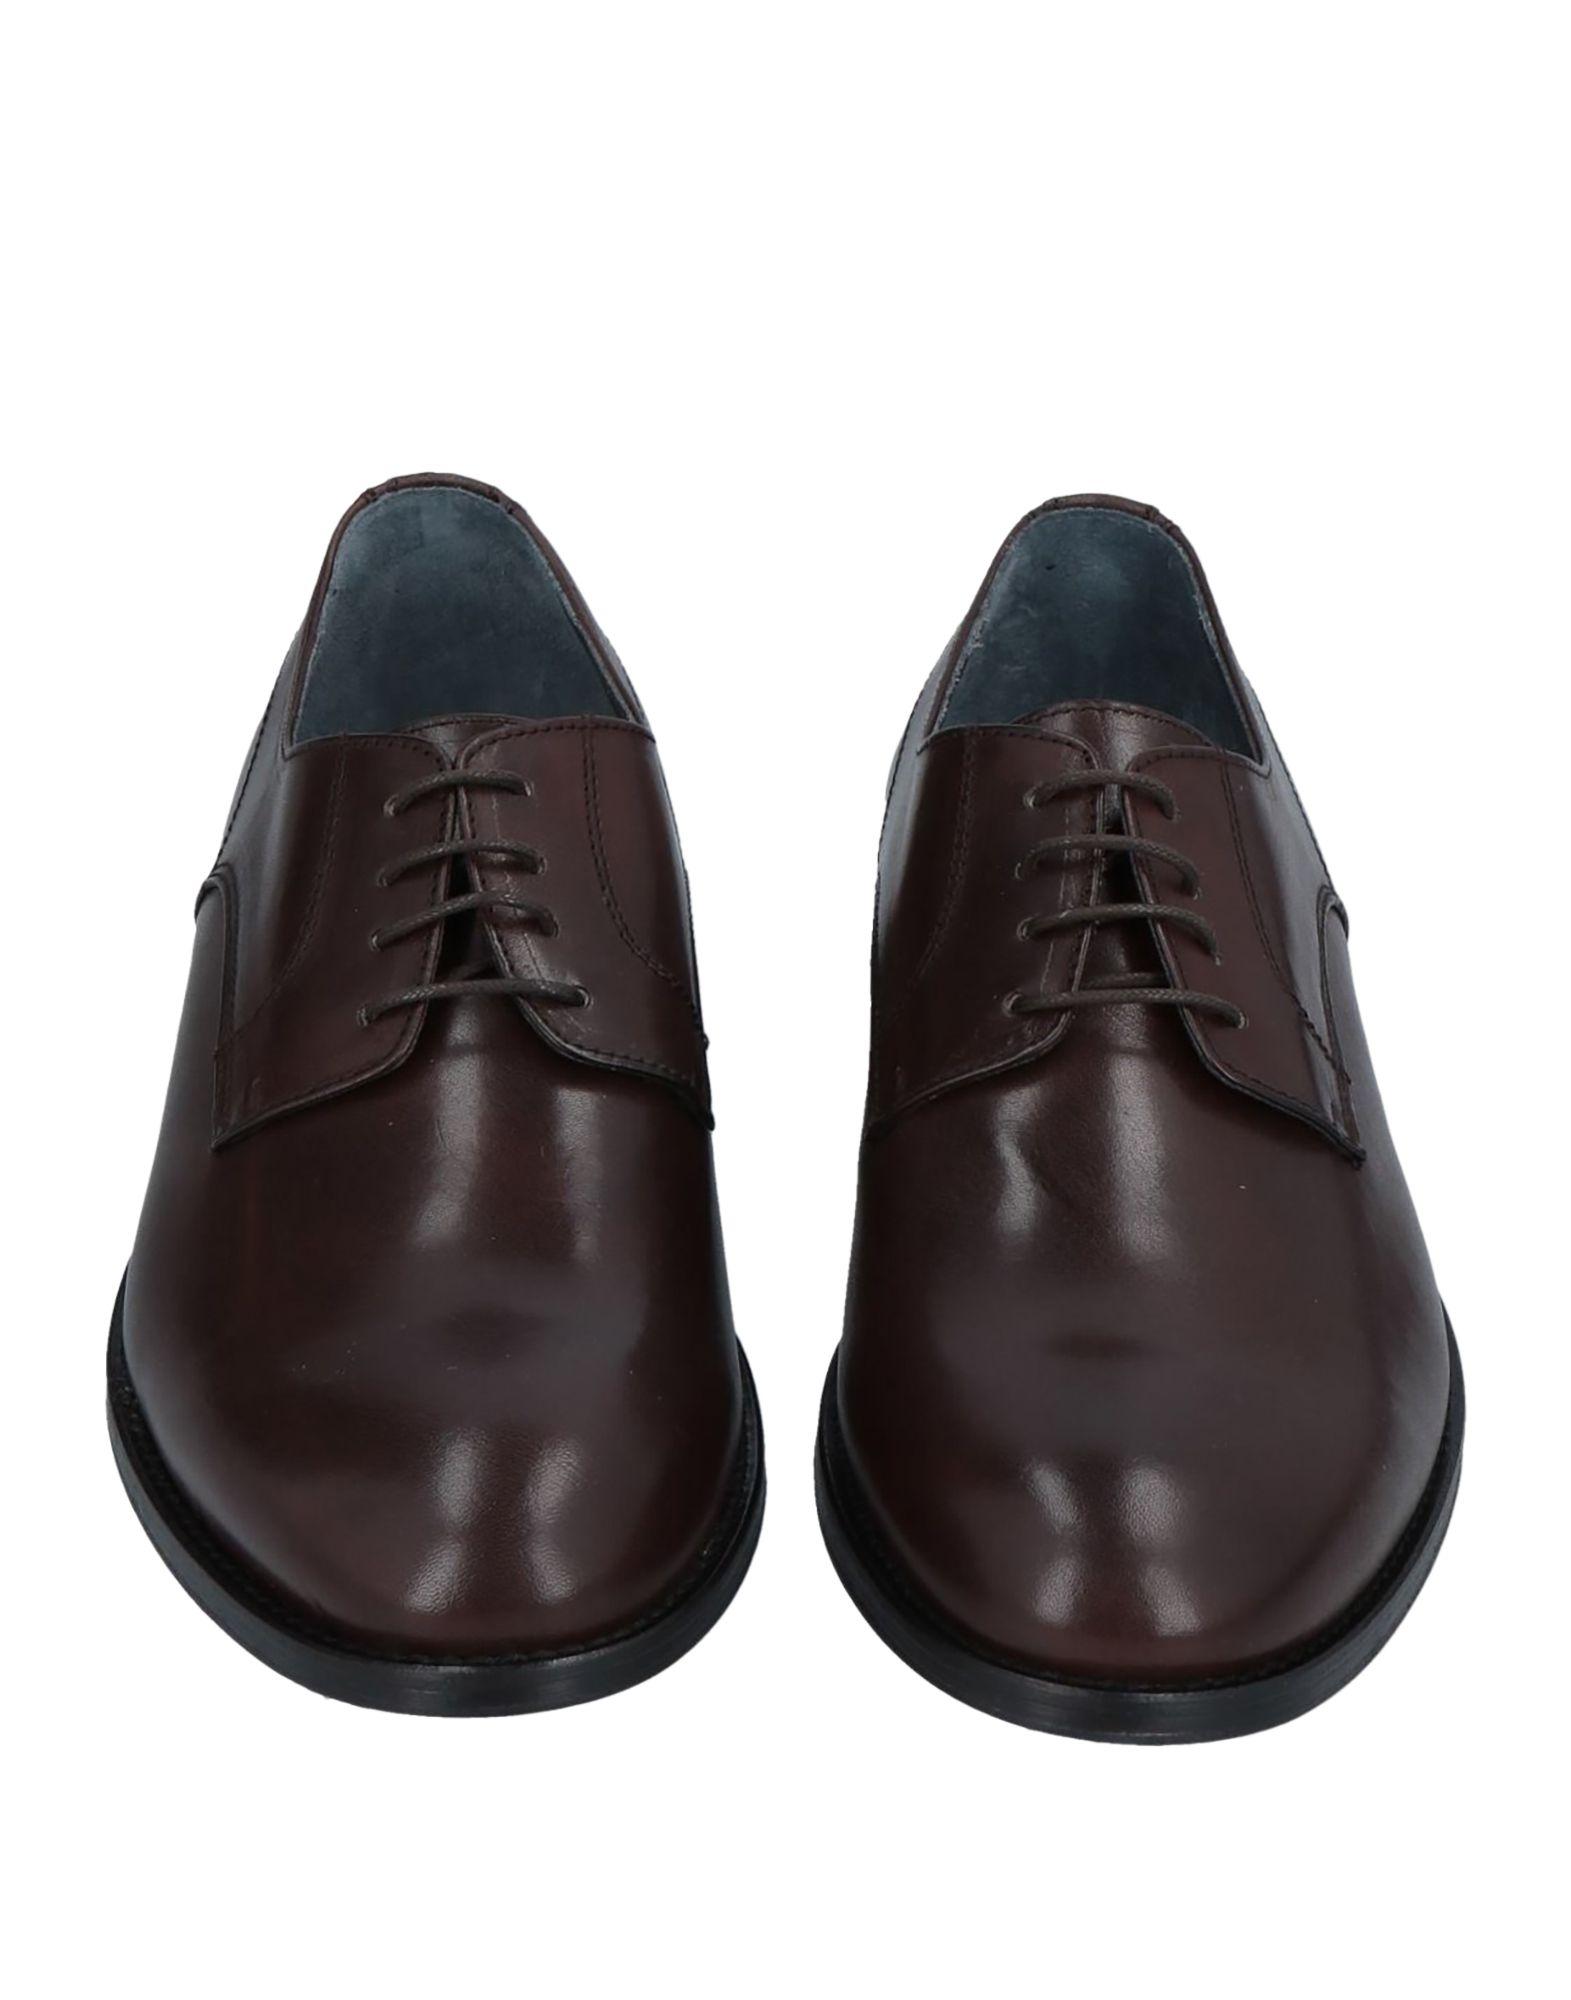 Pollini Leather Lace-up Shoe in Dark Brown (Brown) for Men - Lyst